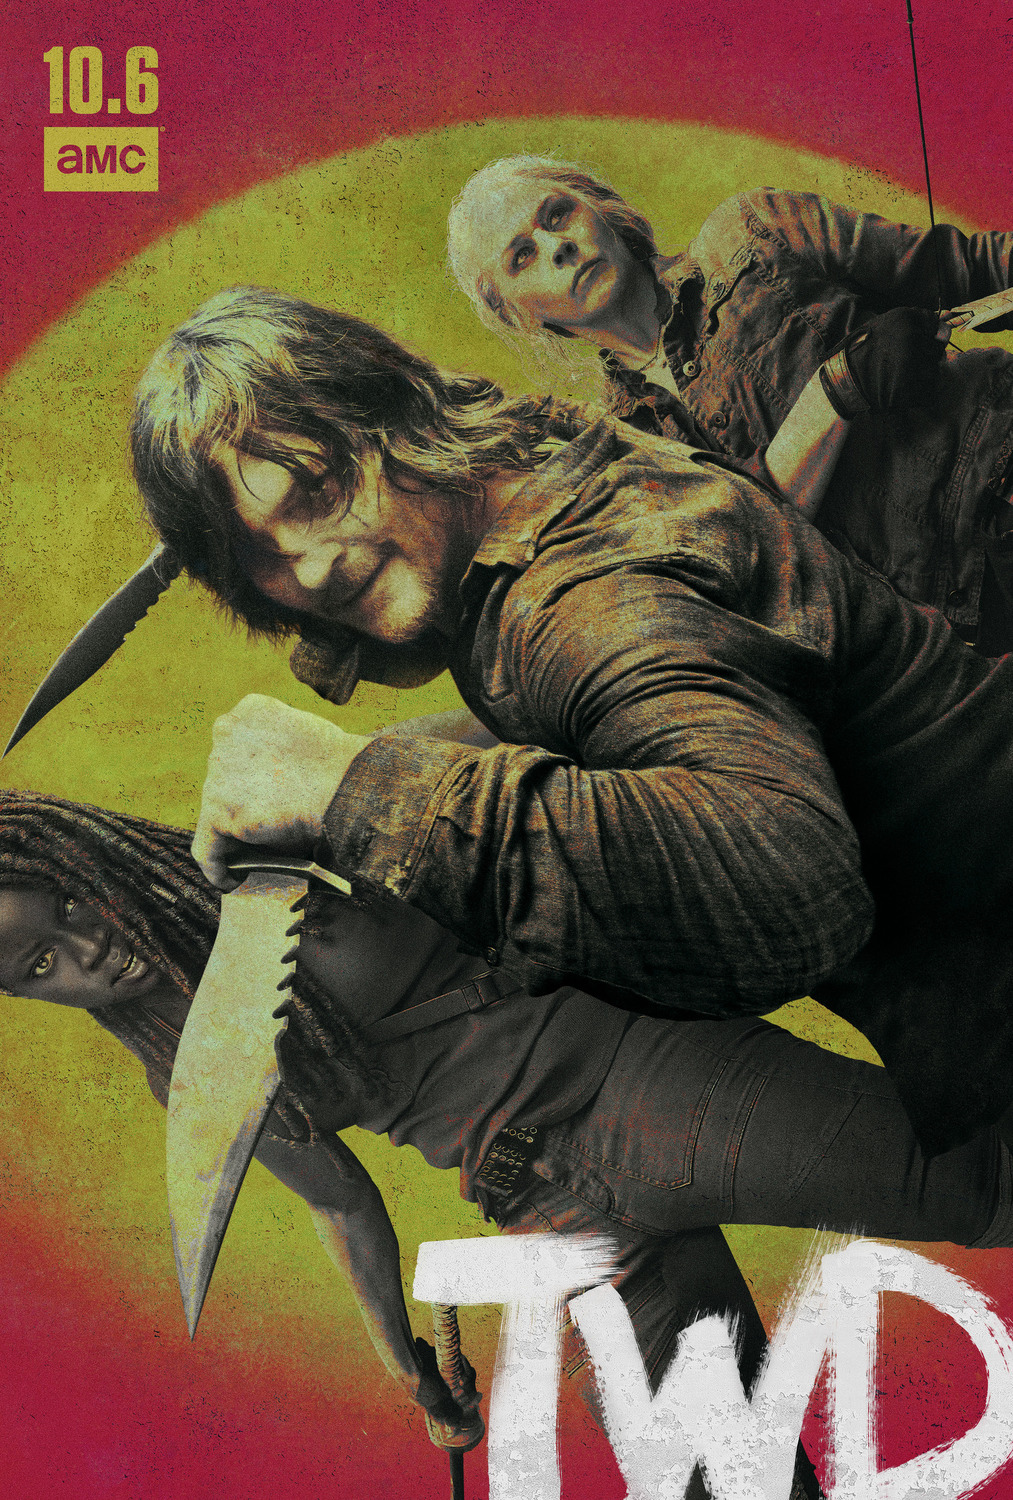 Extra Large TV Poster Image for The Walking Dead (#59 of 67)